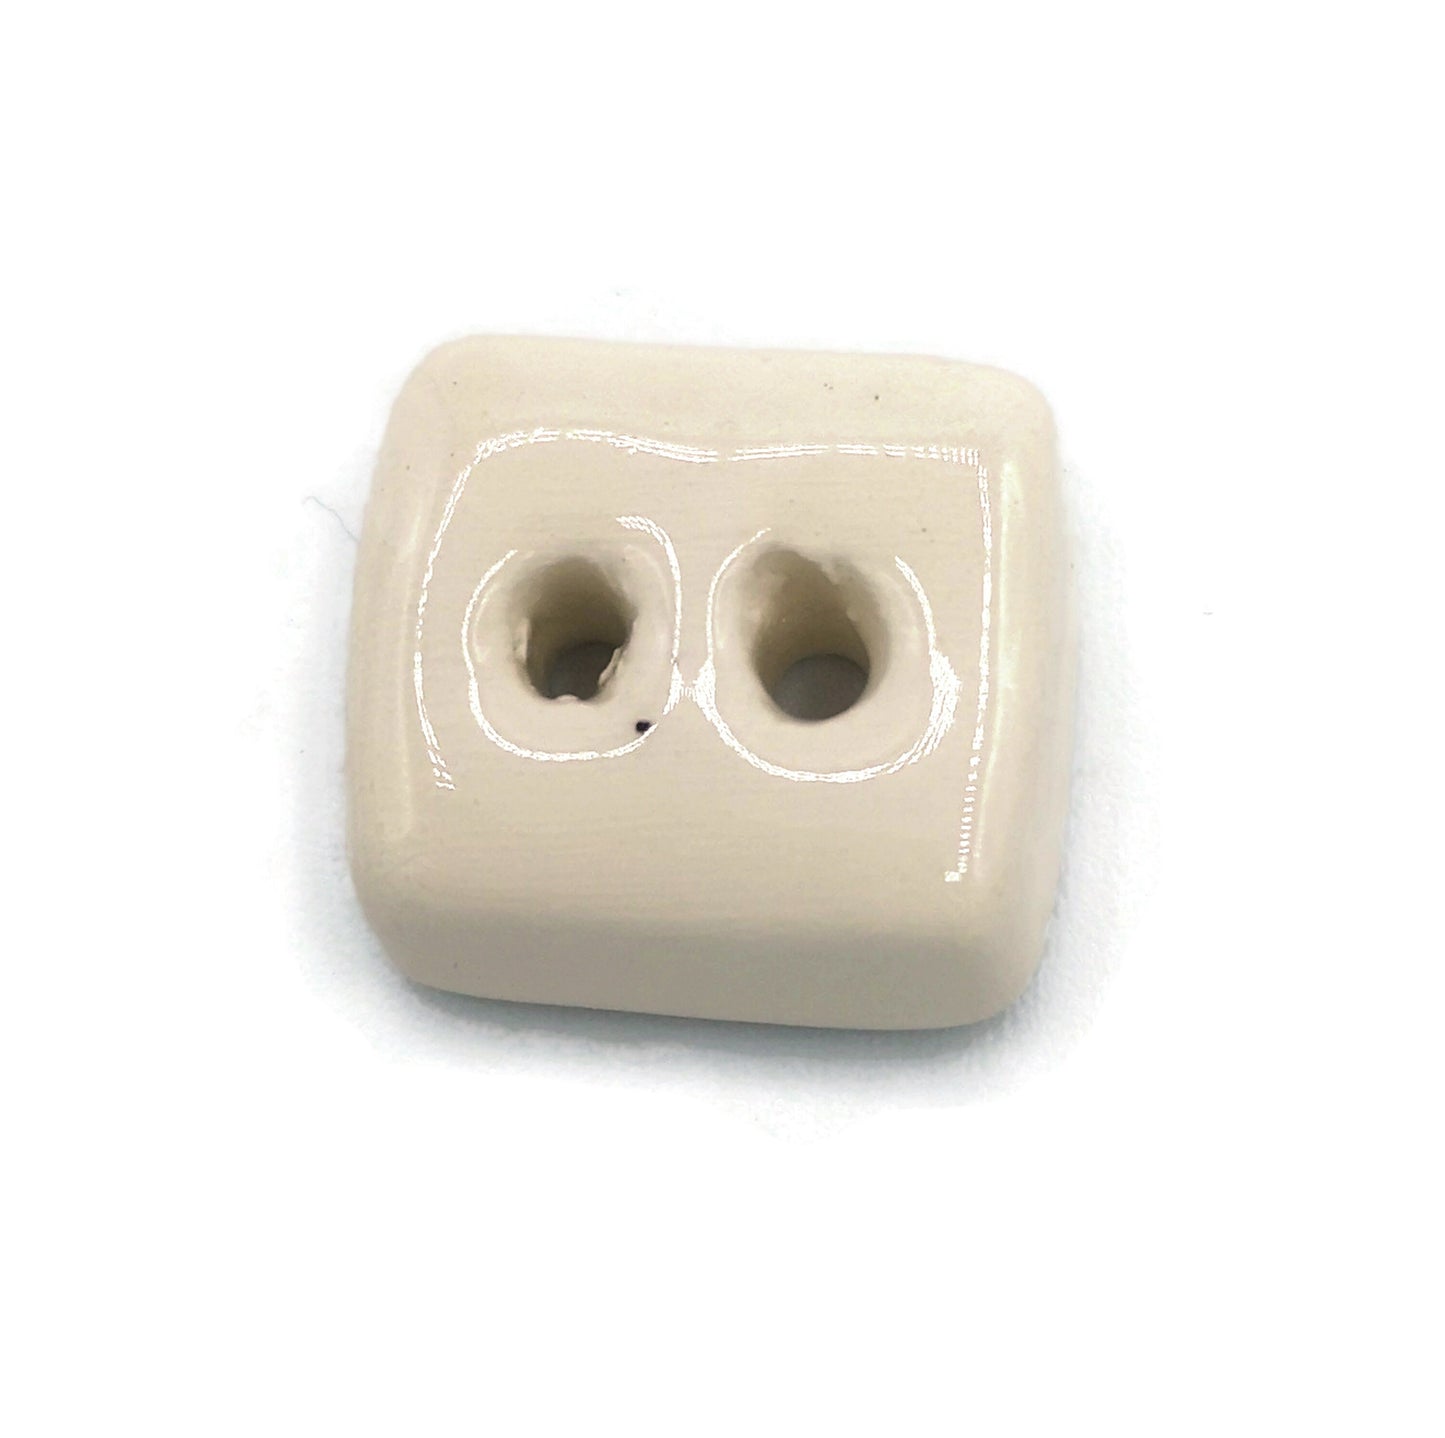 Handmade Ceramic Sewing Buttons, 1 Pc. Square Novelty Buttons For Crafts, Best Selers Custom Buttons, Unique Backpack Buttons Cute Jewelry - Ceramica Ana Rafael